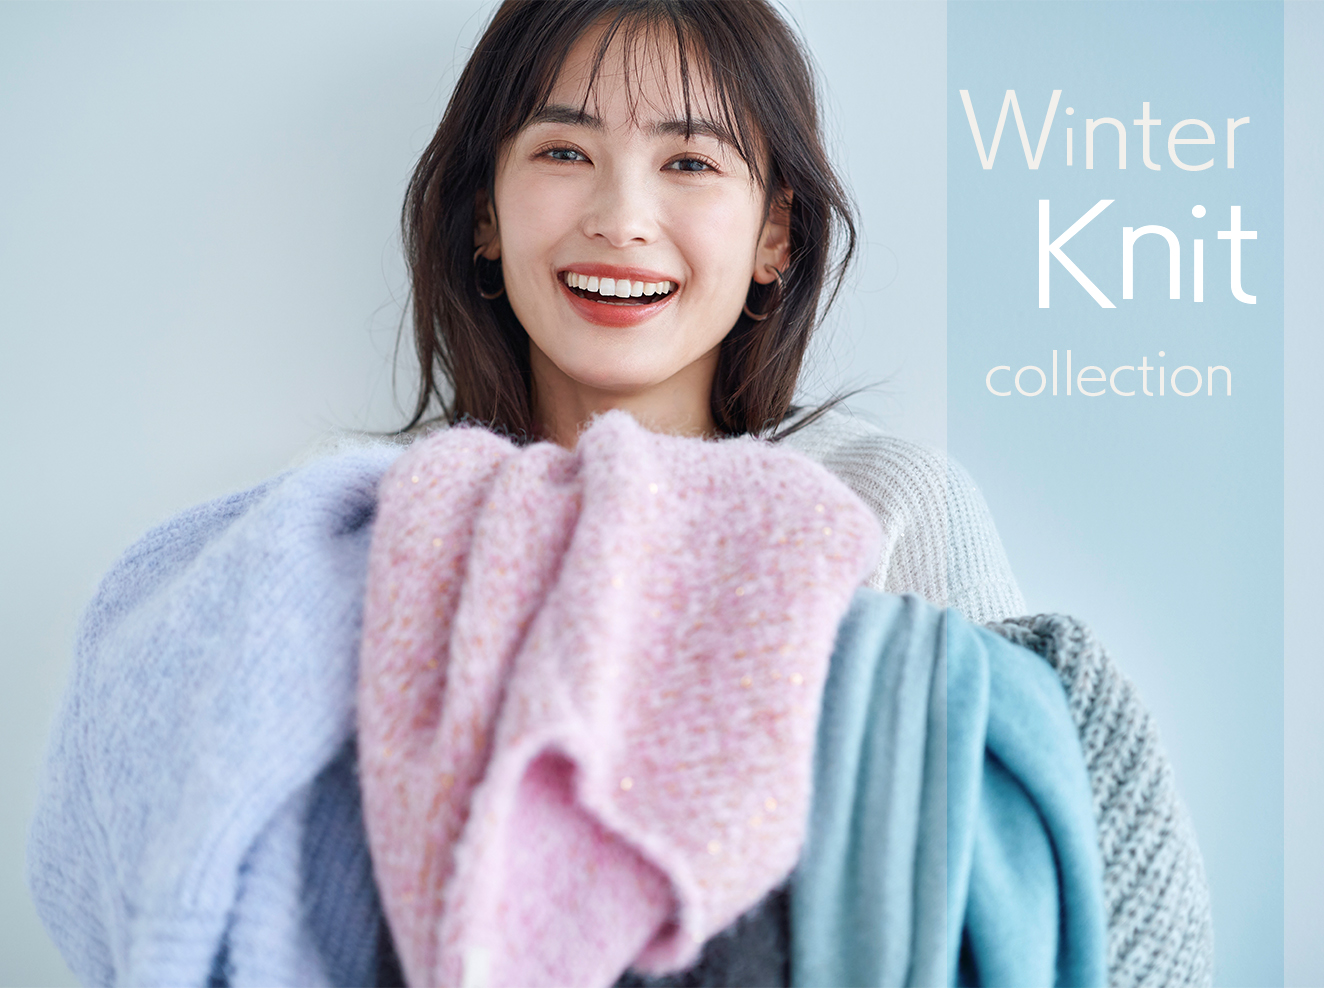 Winter Knit collection｜Stola.（ストラ）公式通販サイト